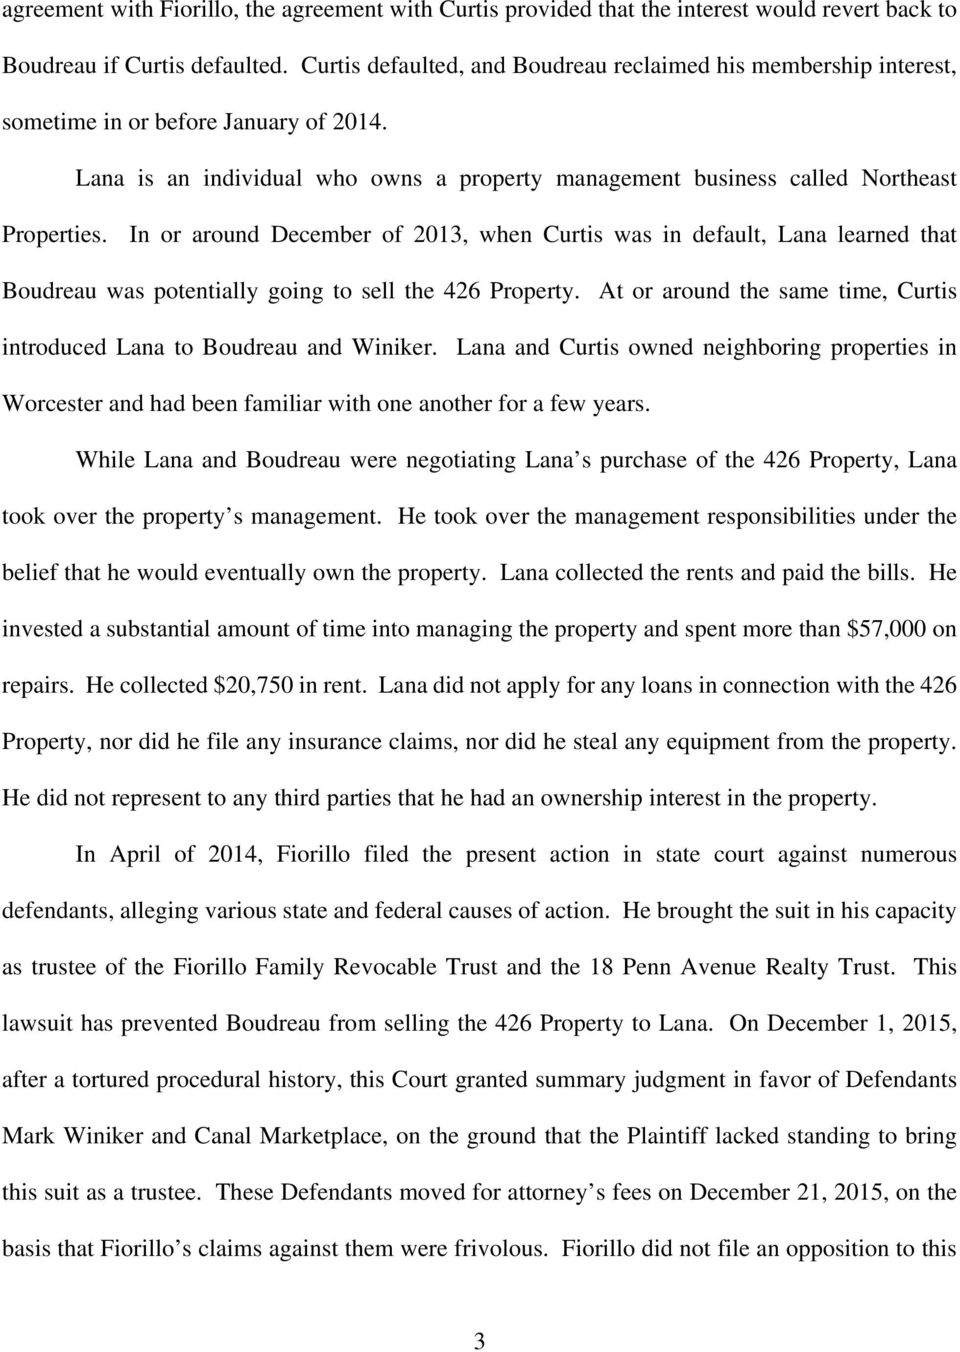 In or around December of 2013, when Curtis was in default, Lana learned that Boudreau was potentially going to sell the 426 Property.